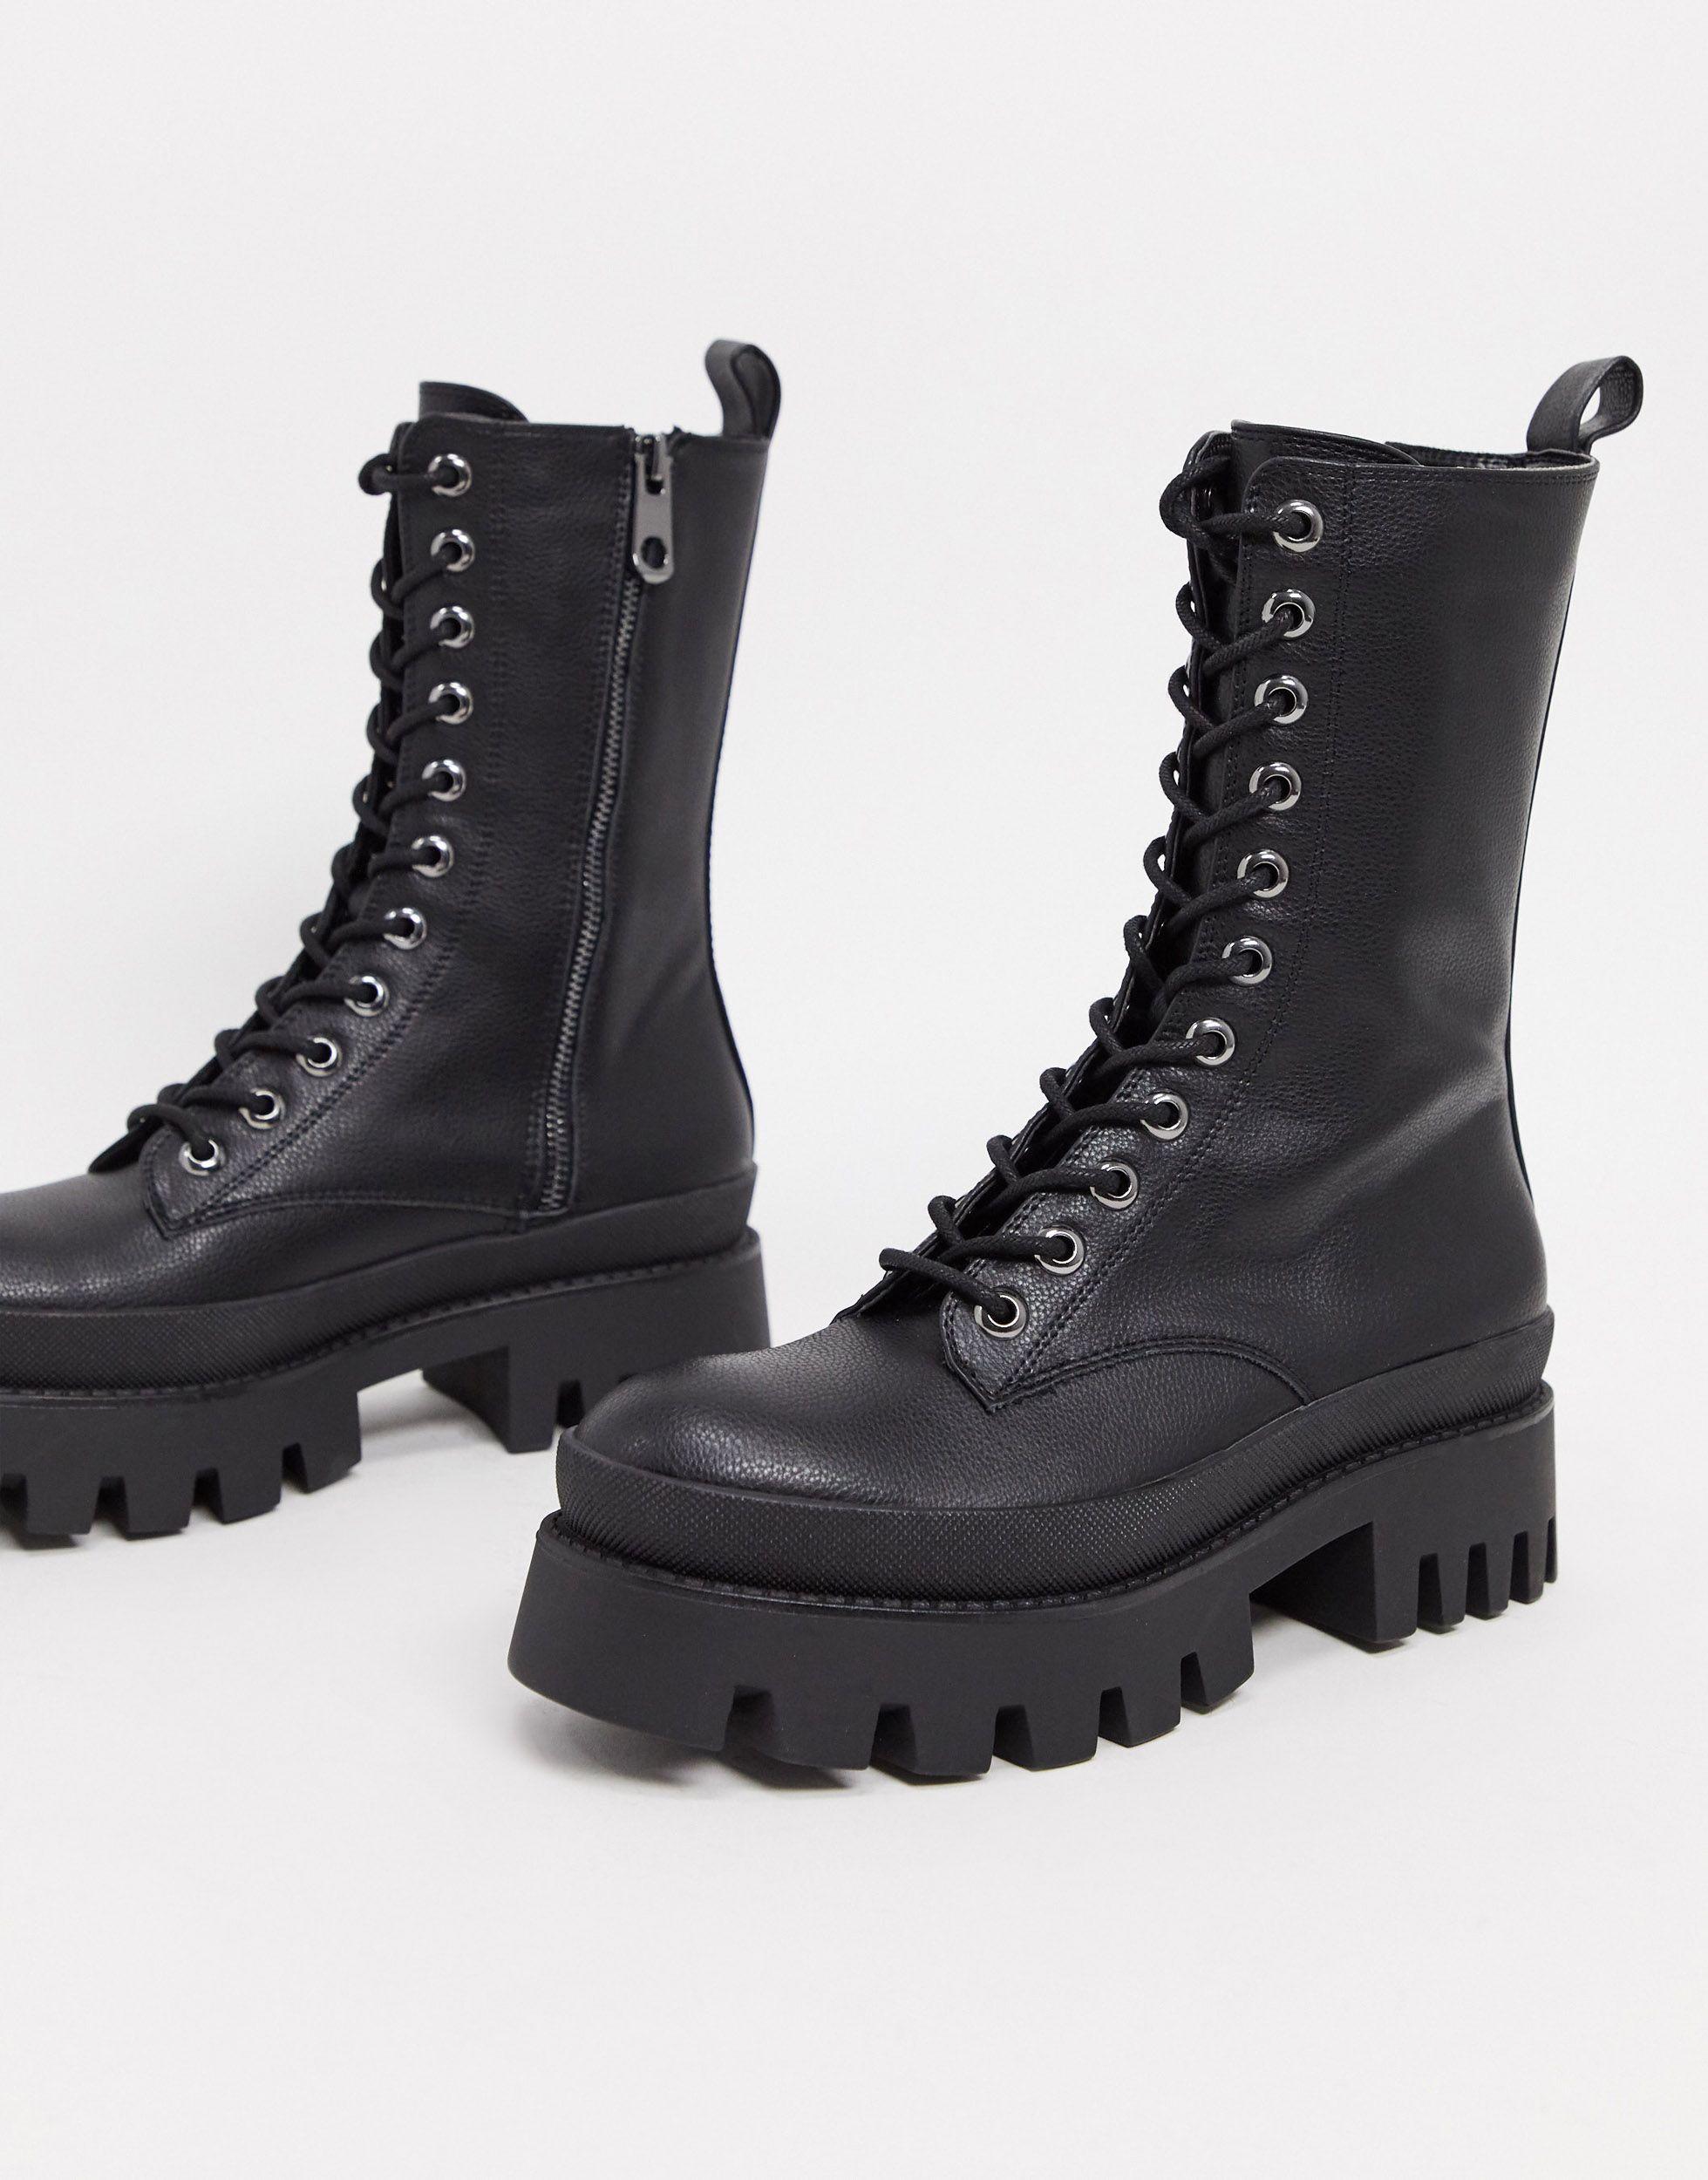 Bershka Lace Up Biker Boot With Sole Detail in Black | Lyst